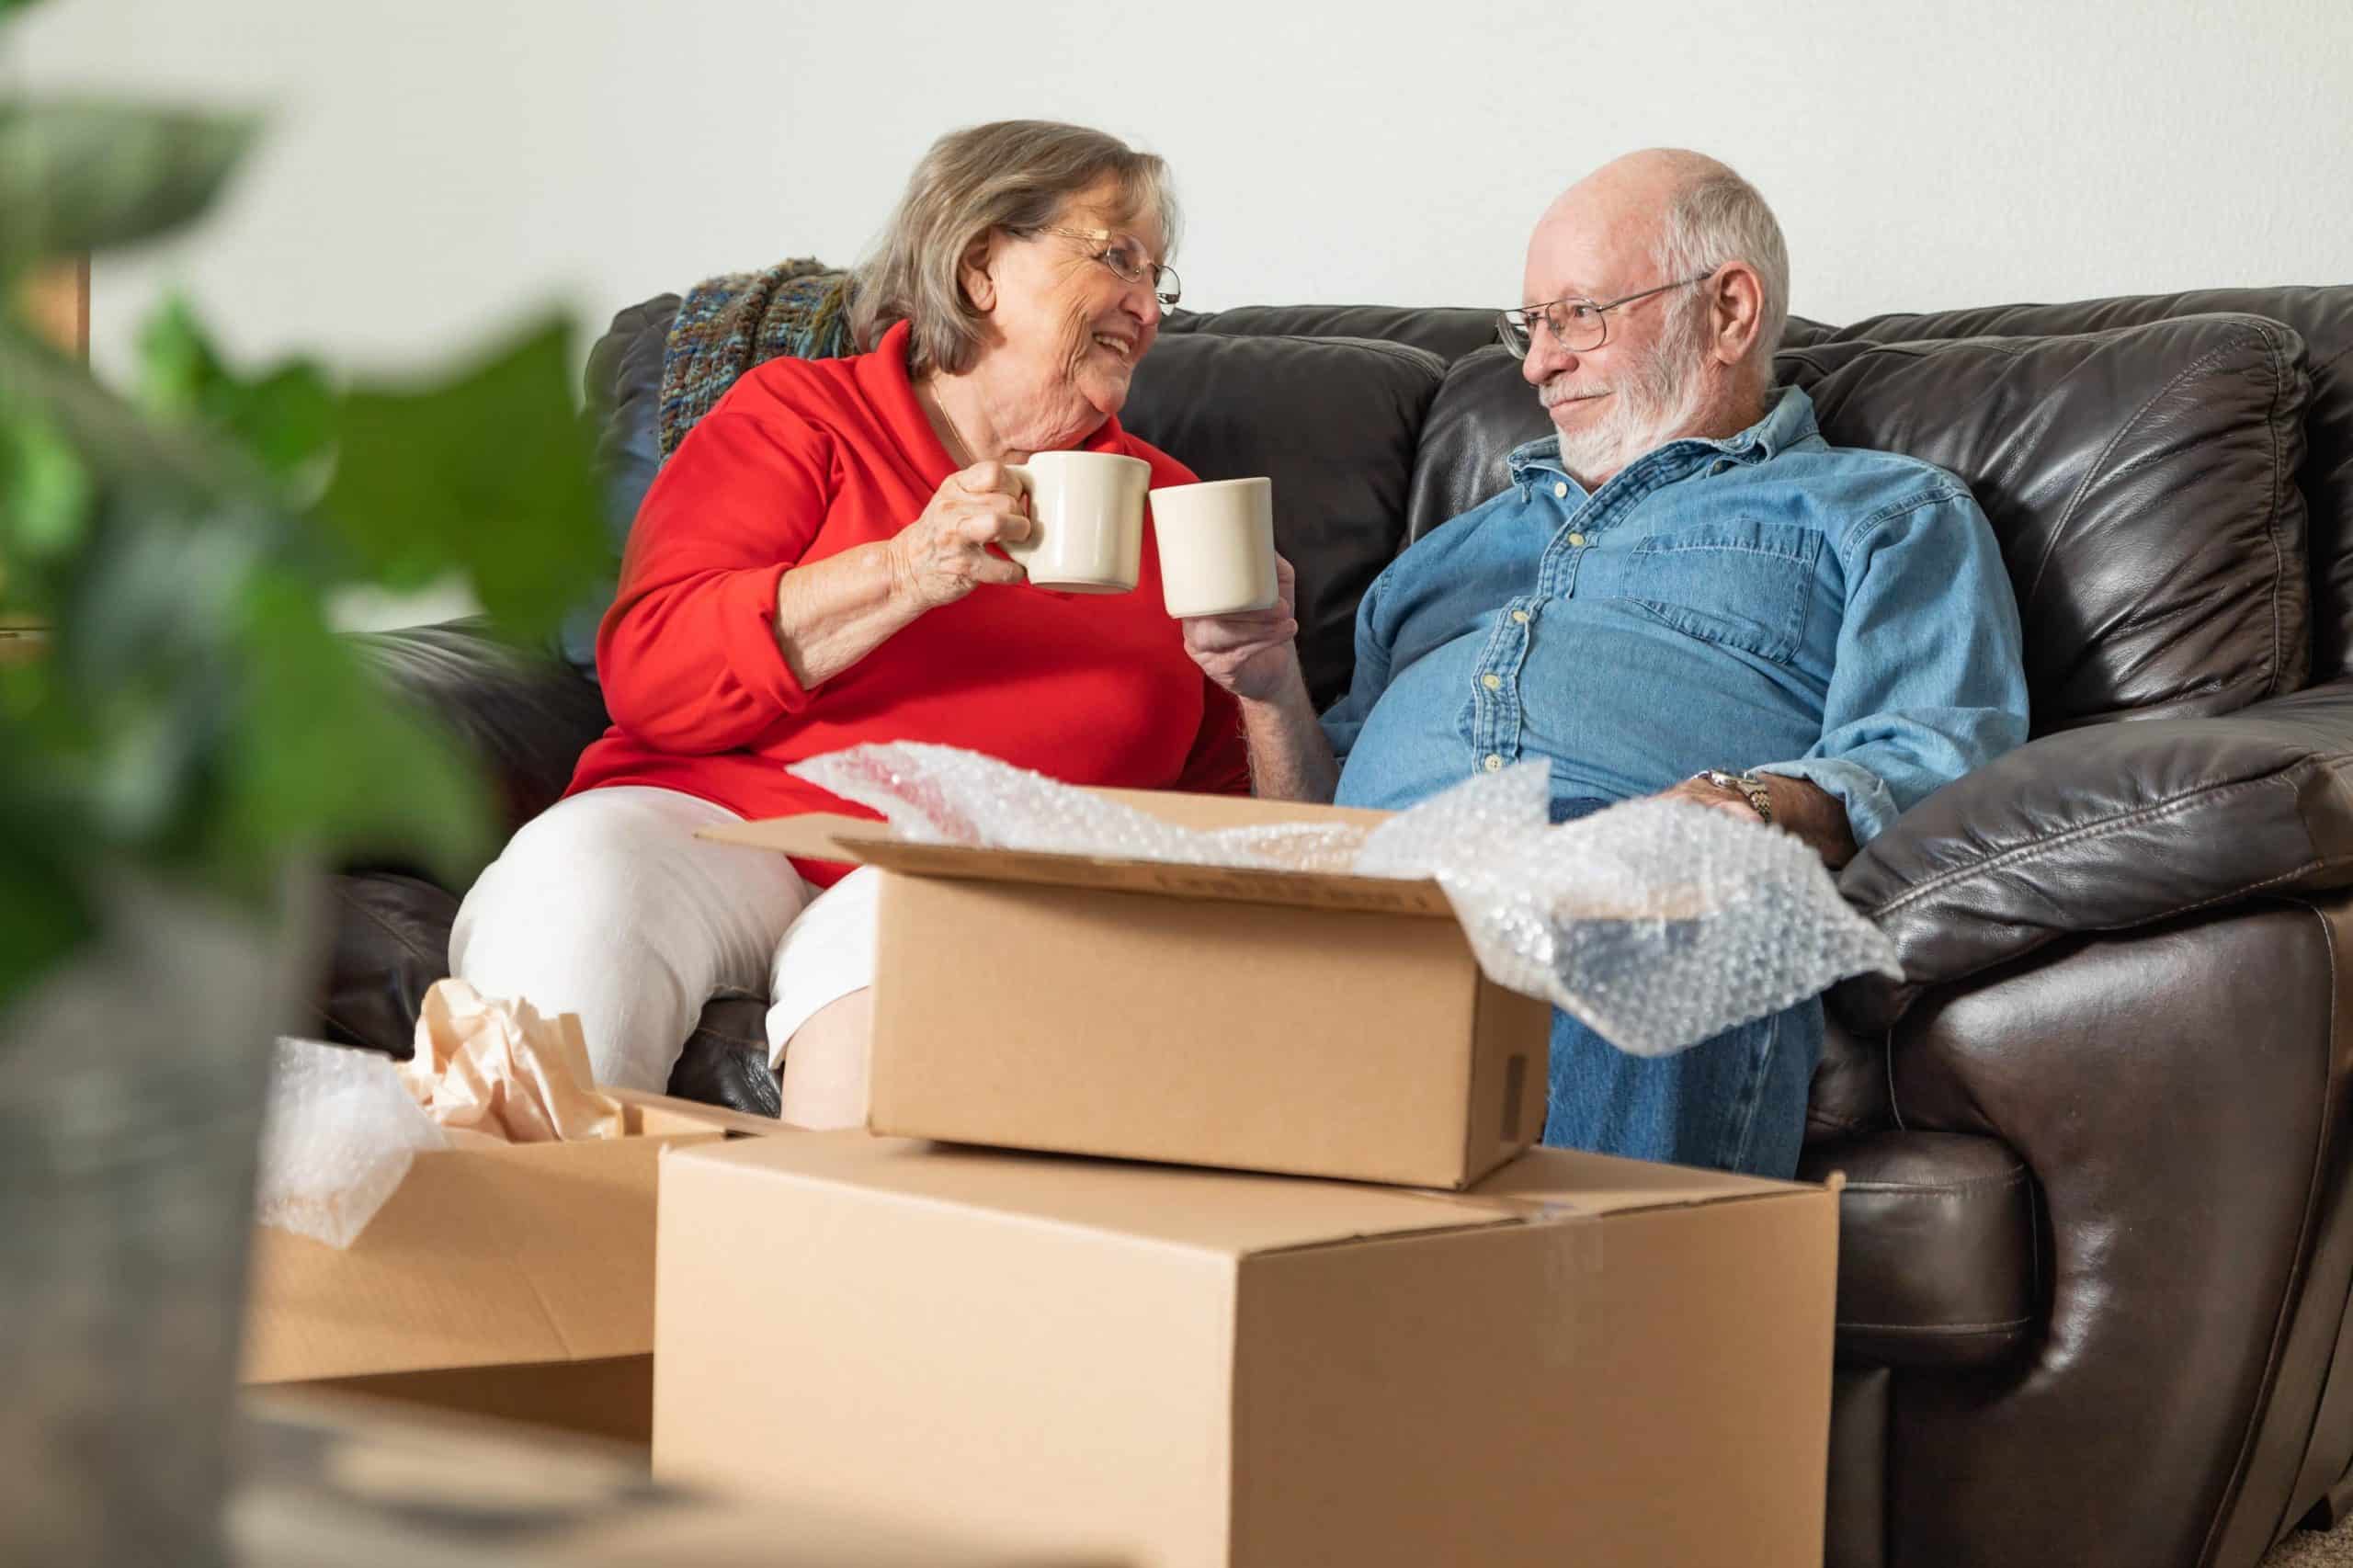 Senior woman and man enjoying coffee surrounded by moving boxes